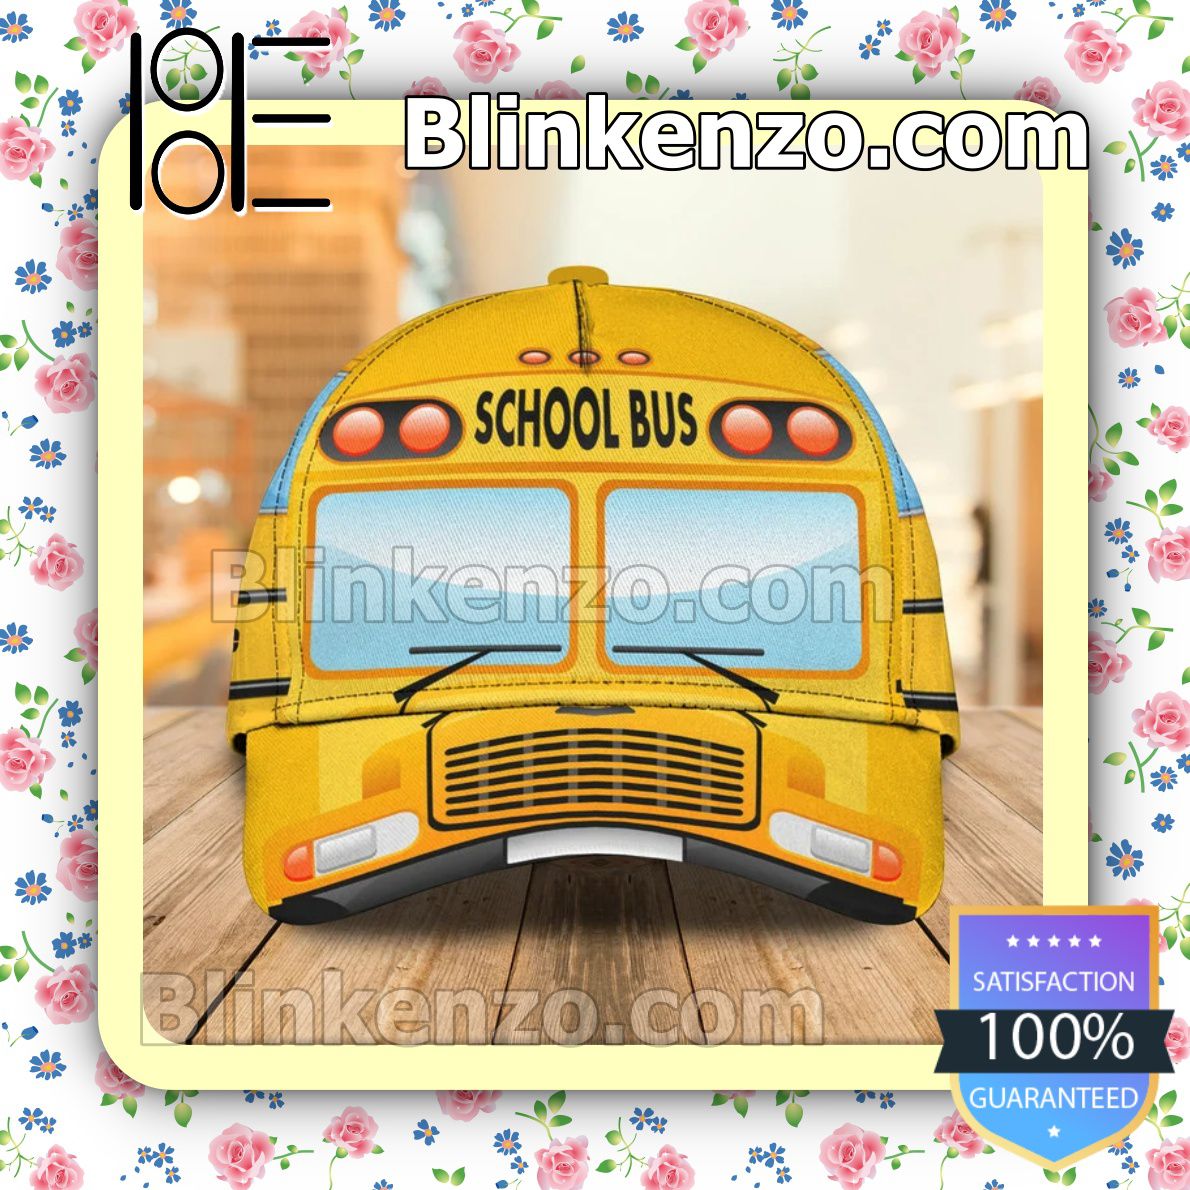 Very Good Quality Personalized School Bus Printed Baseball Caps Gift For Boyfriend